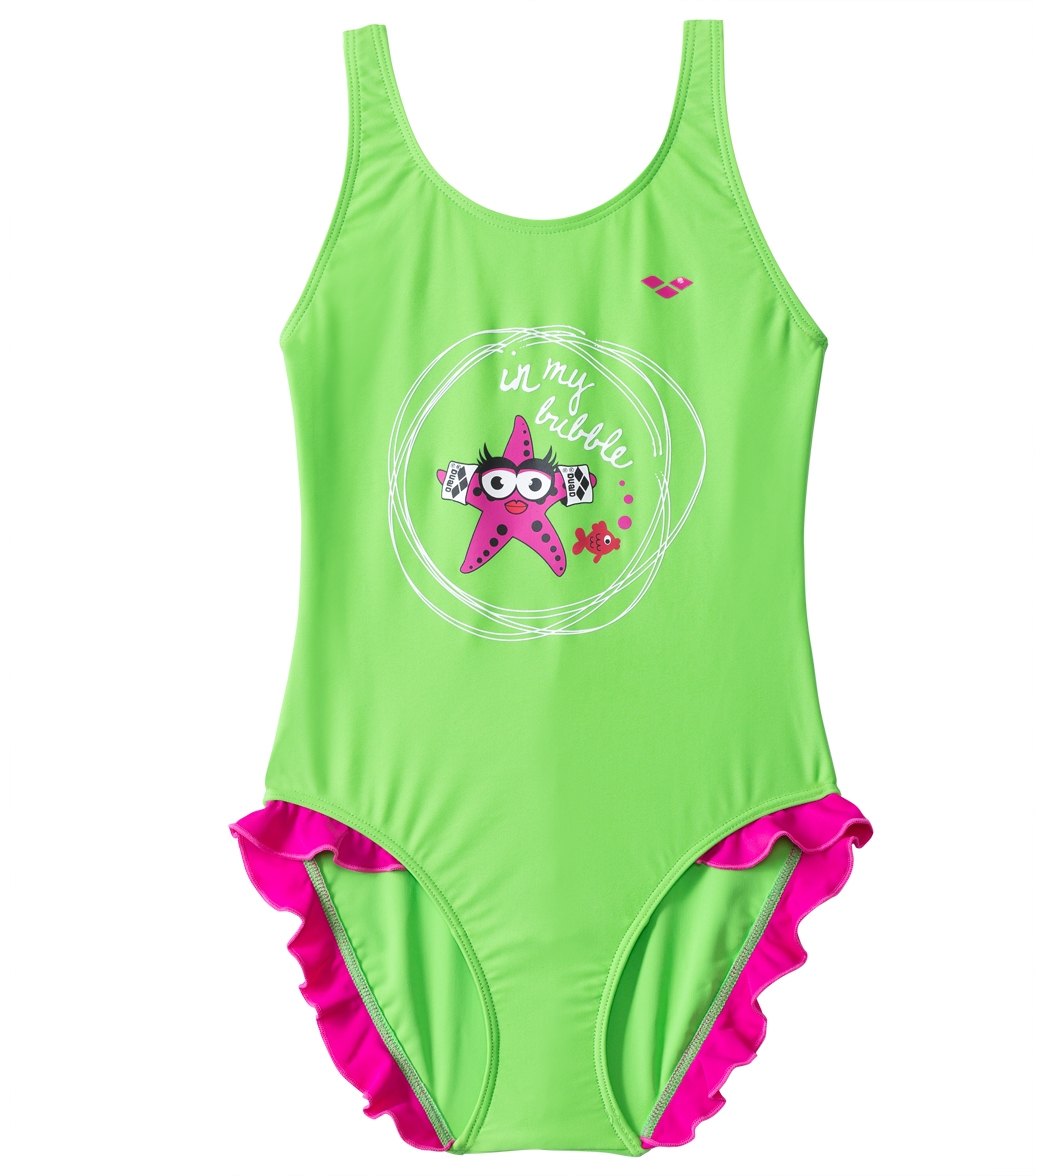 Arena Water Tribe Girls One Piece Swimsuit - Energy Green 3T Elastane/Polyamide - Swimoutlet.com